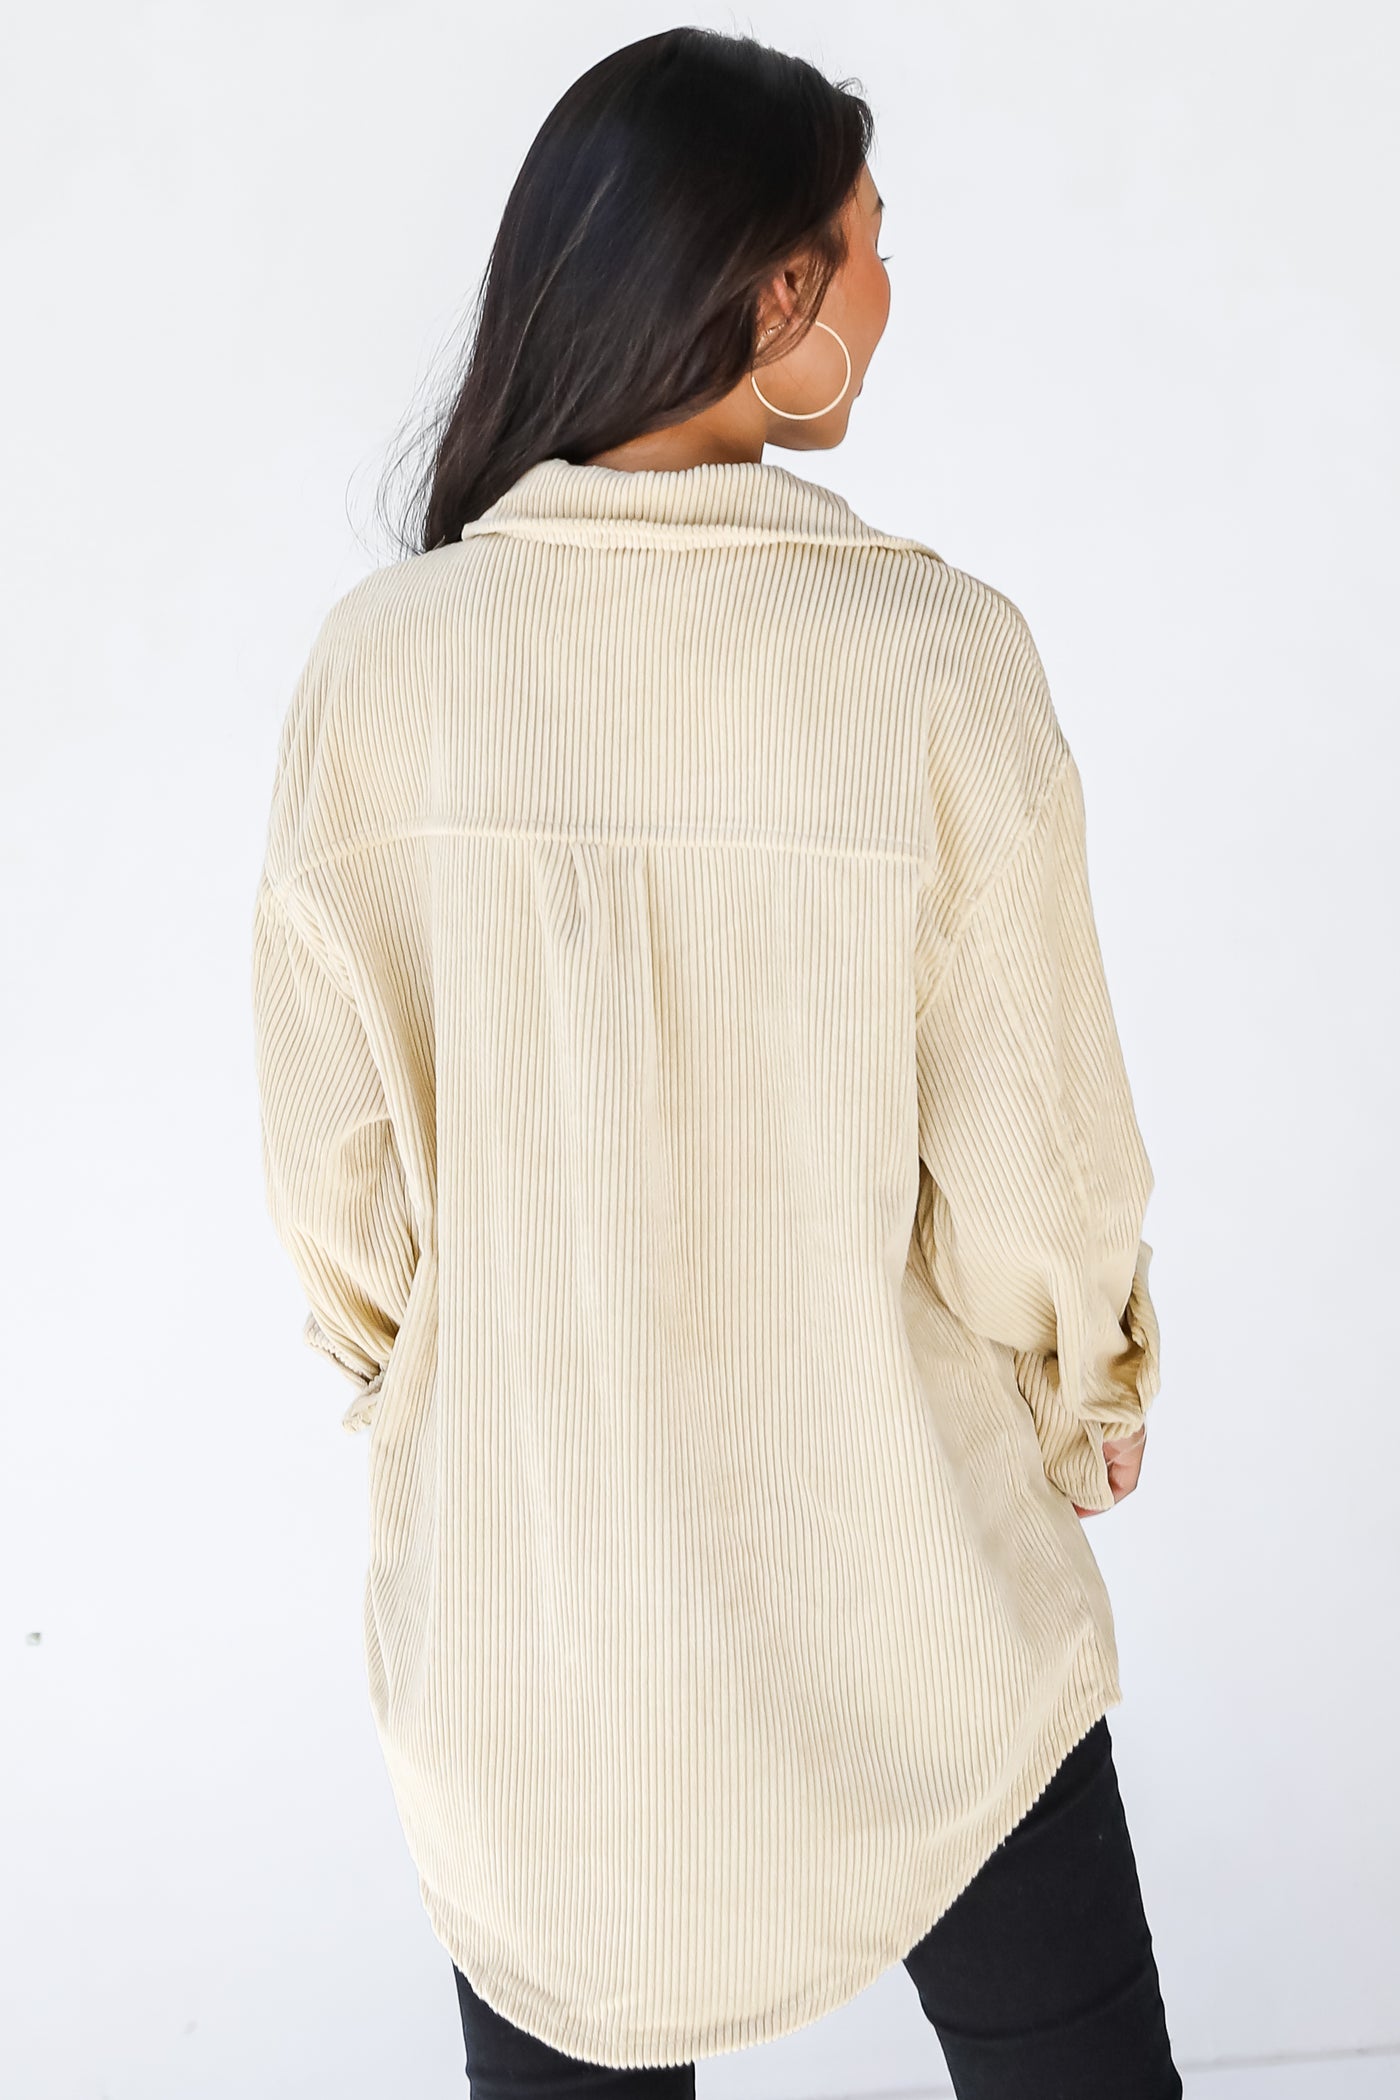 Corduroy Shacket in yellow back view